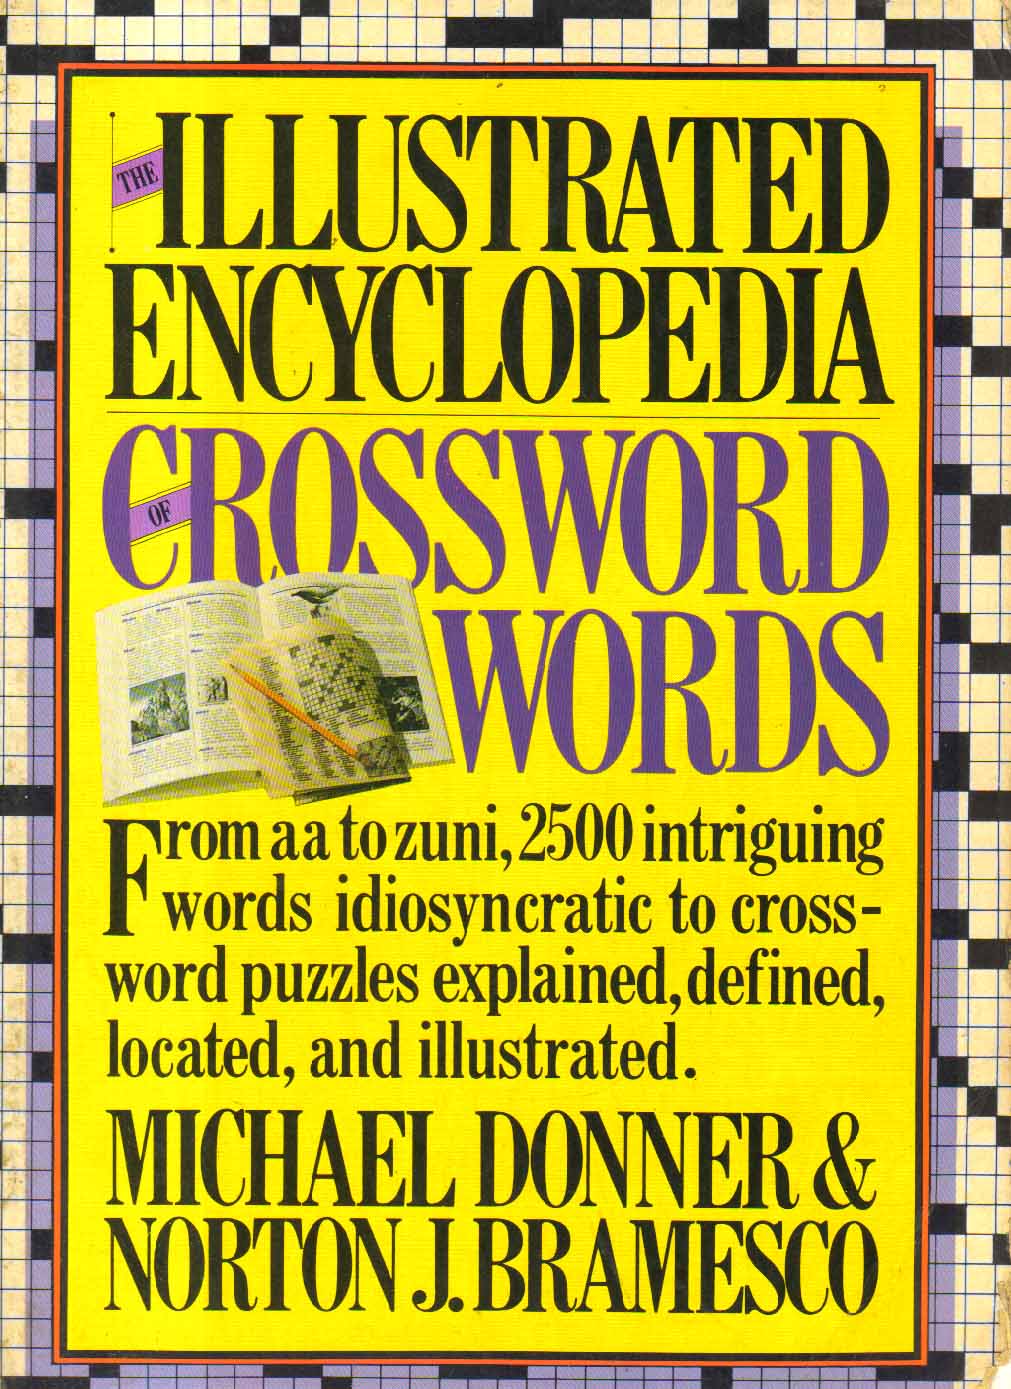 The Illustrated Encyclopedia Crossword Words.